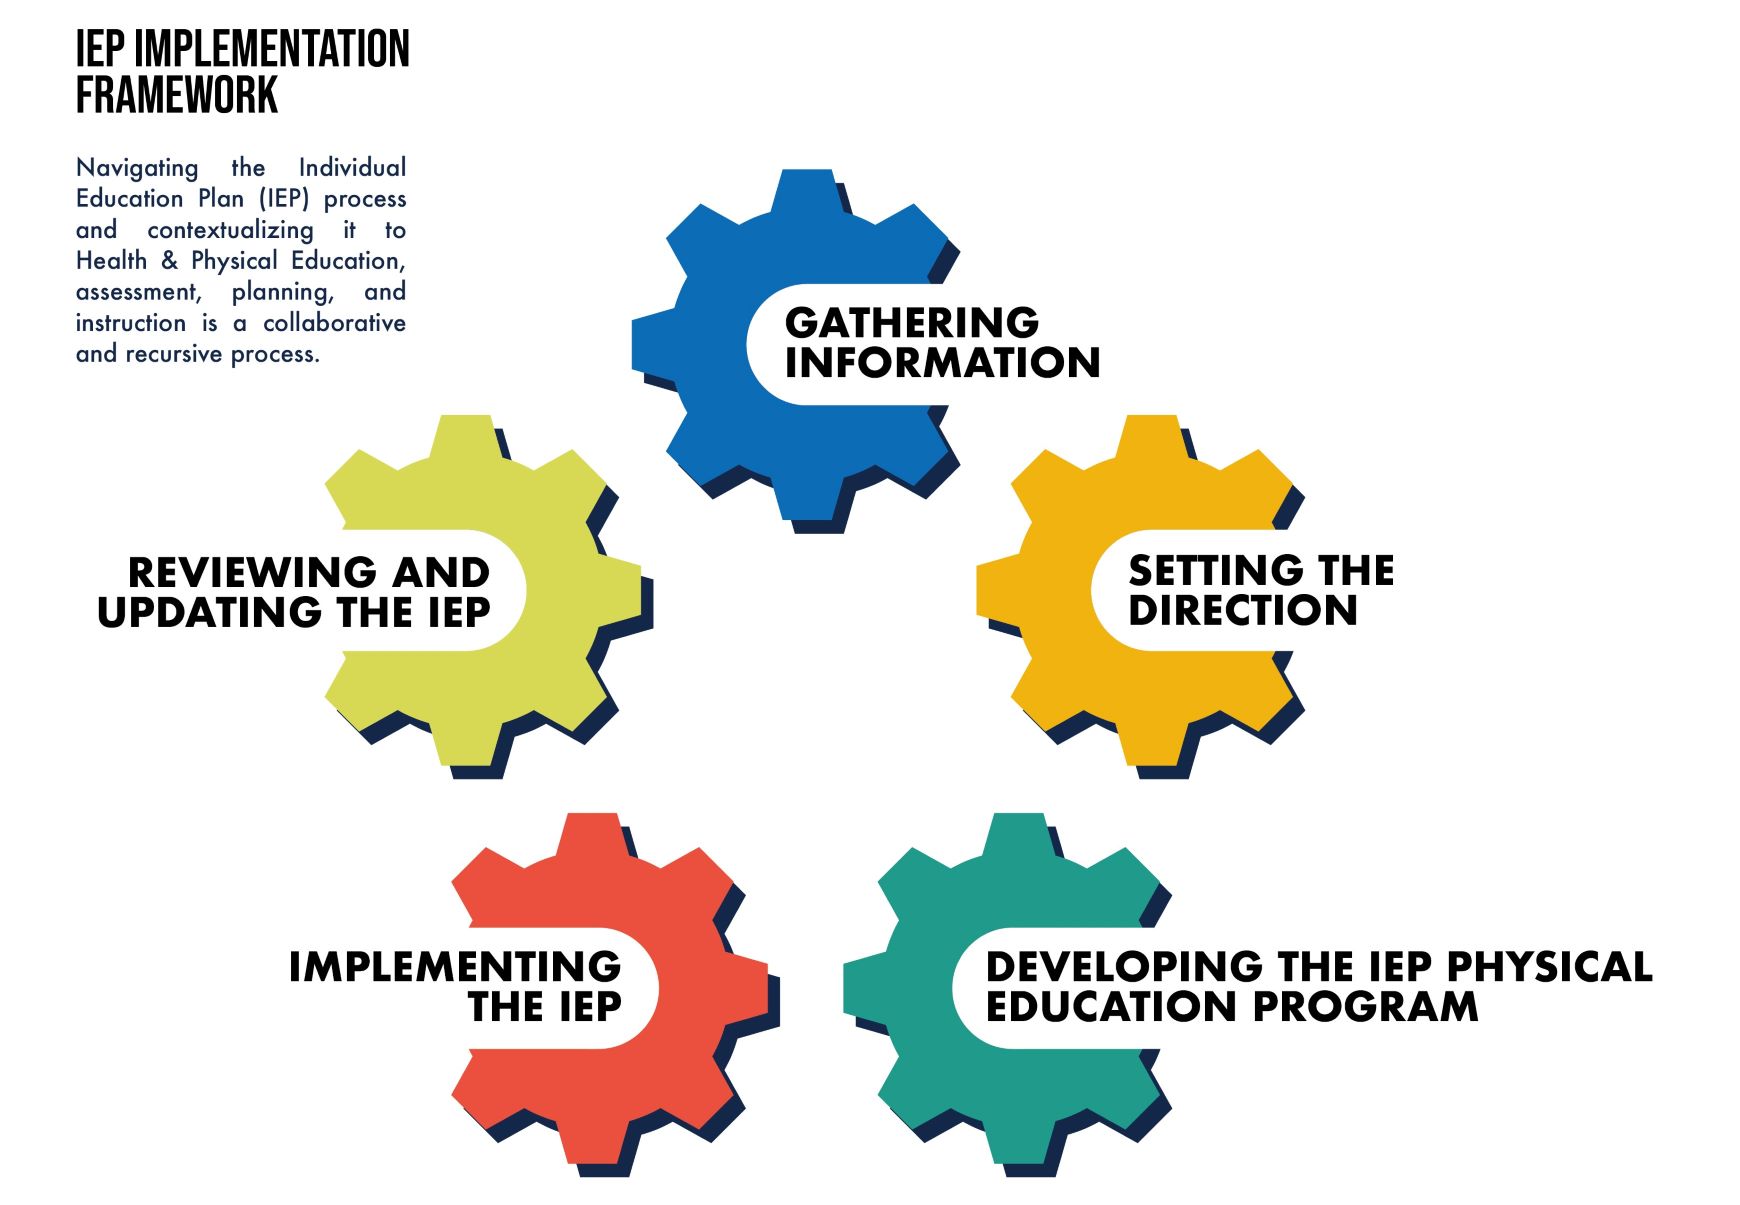 Image title: IEP Implementation Framework. Text under title: Navigating the Individual Education Plan (IEP) process and contextualizing it to Health & Physical Education, assessment, planning, and instruction is a collaborative and recursive process. Image of five gears in a circle. Each gear has a title. Title 1: Gathering Information. Title 2: Setting the Direction: Title 3: Developing the IEP Physical Education Program. Title 4: Implementing in the IEP. Title 5: Reviewing and Updating the IEP.